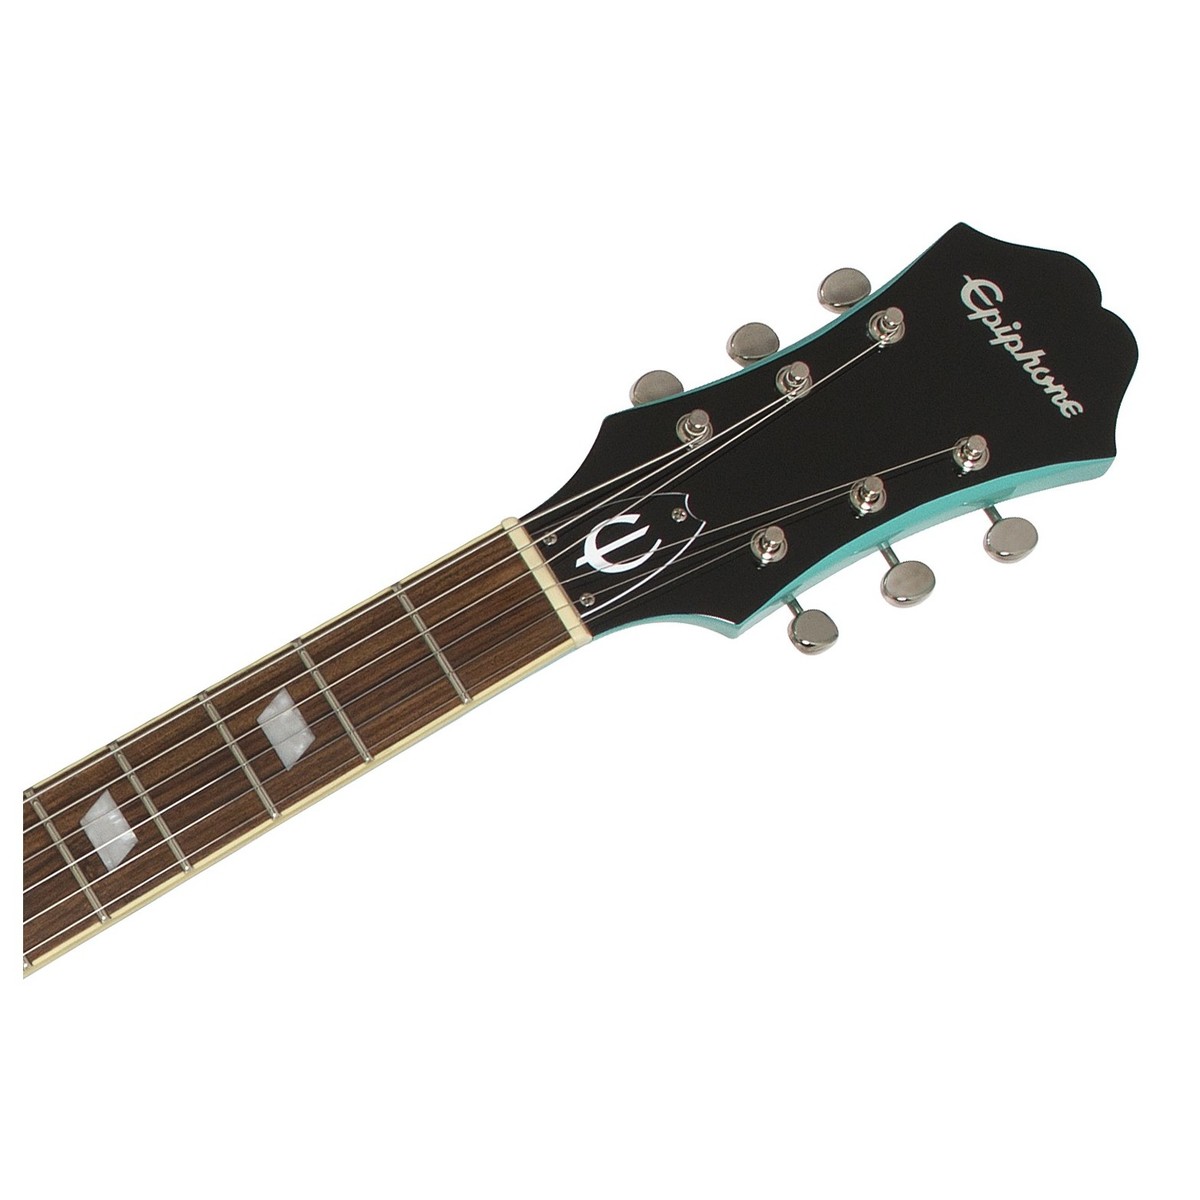 Epiphone Casino Coupe Archtop 2019 2p90 Ht Pf - Turquoise - Semi hollow elektriche gitaar - Variation 2